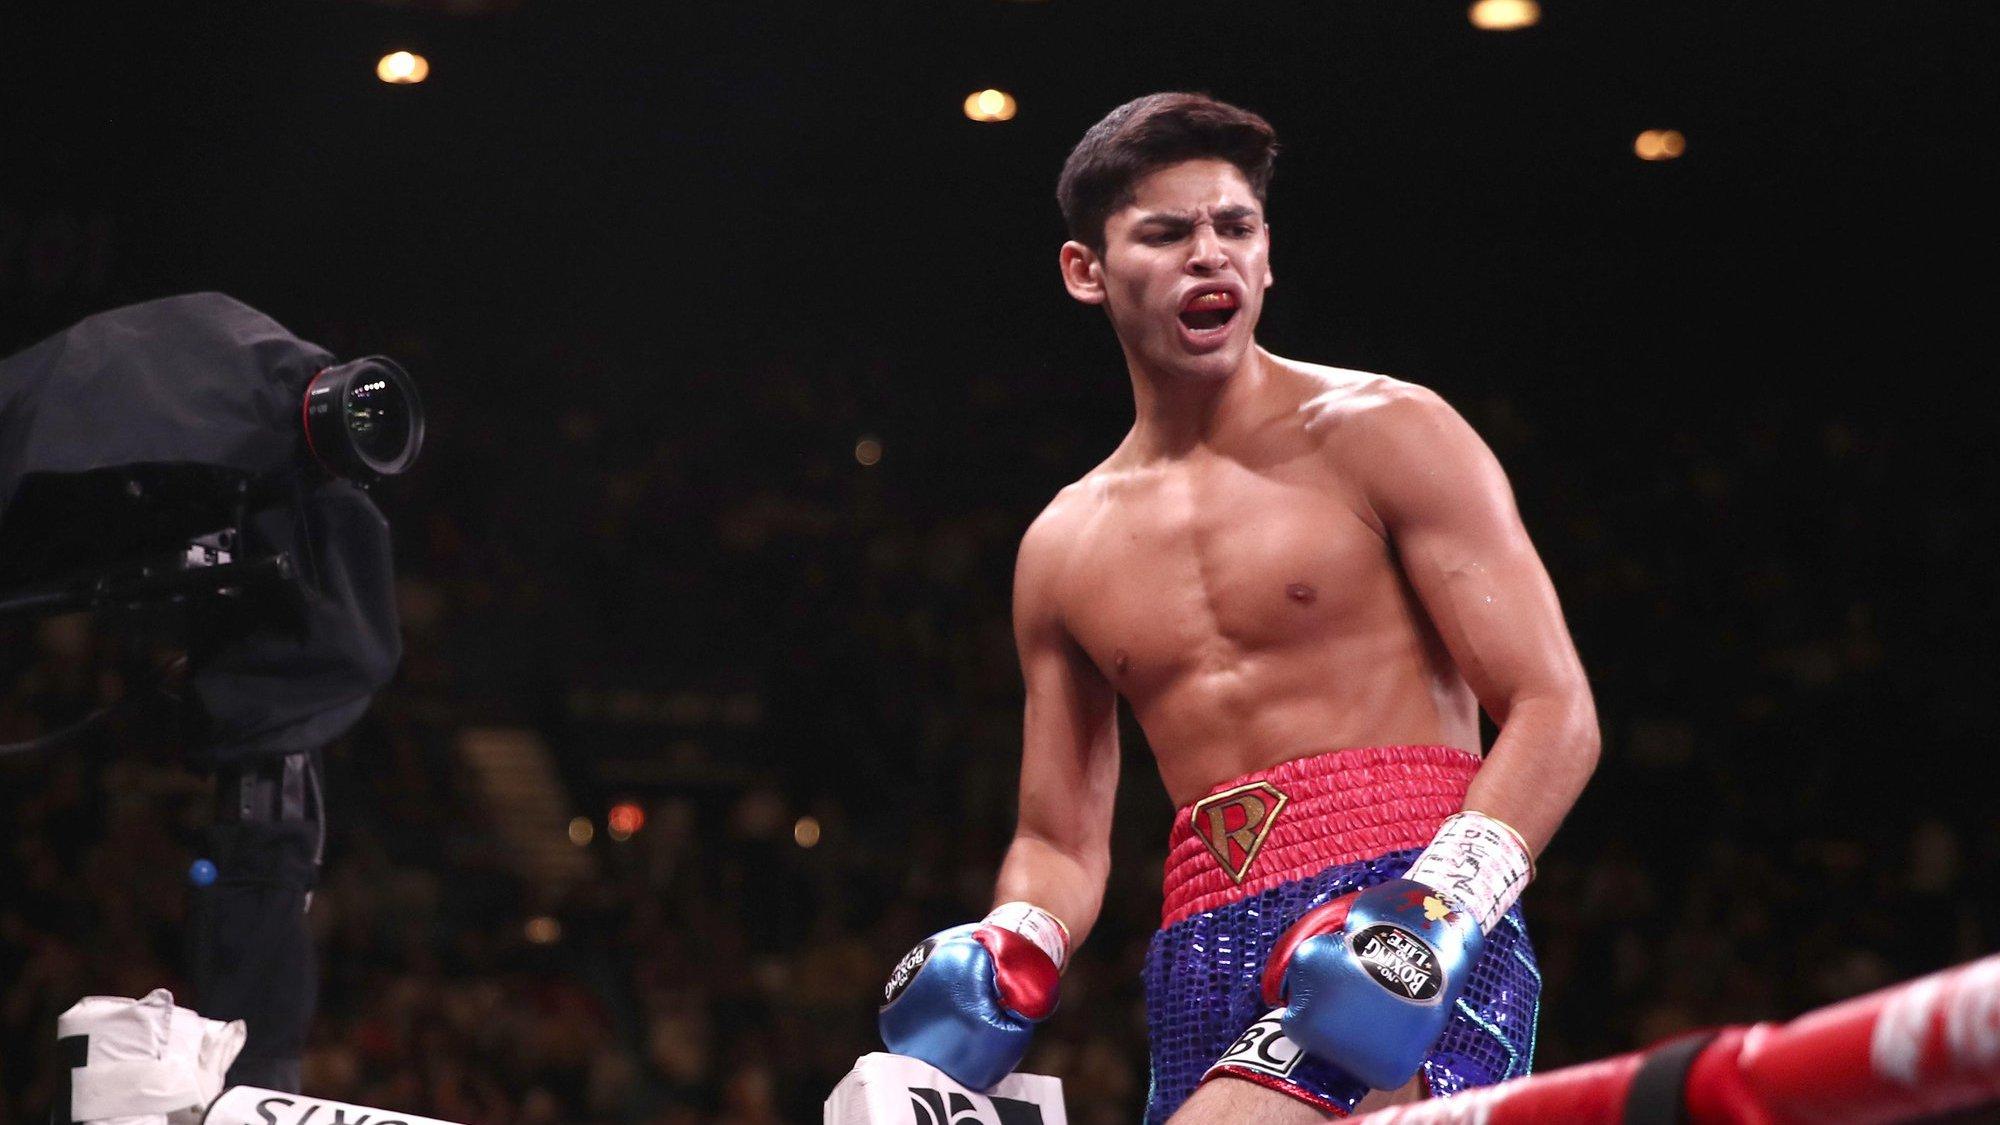 Ryan Garcia vs. Javier Fortuna Boxing Betting: Will Garcia score another early KO? cover